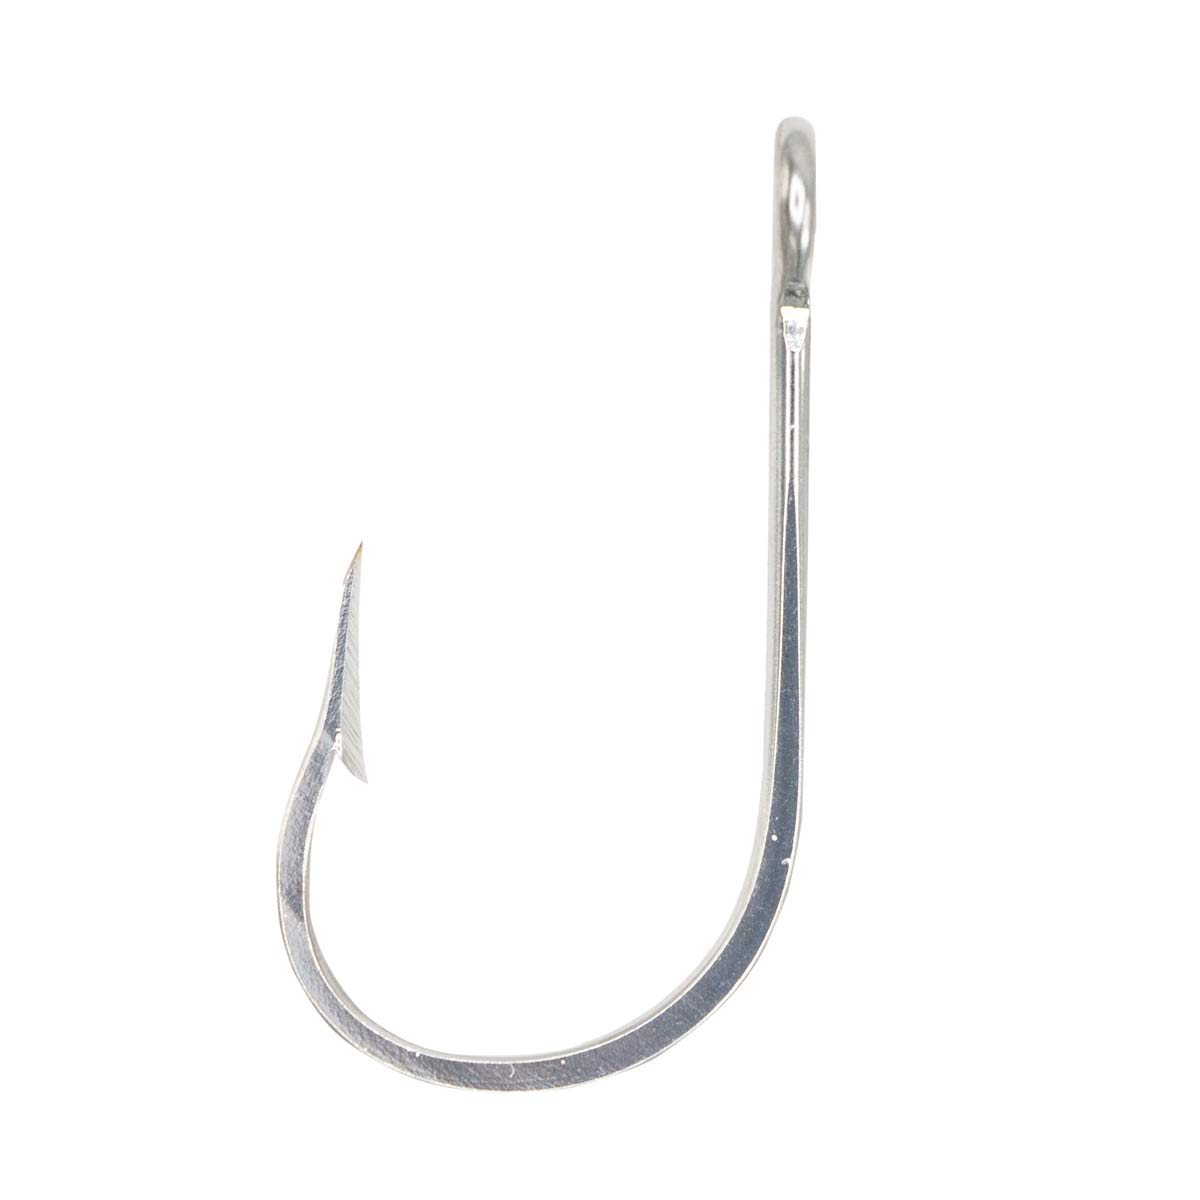 Southern Style Hook (2 Pack) – Rite Angler